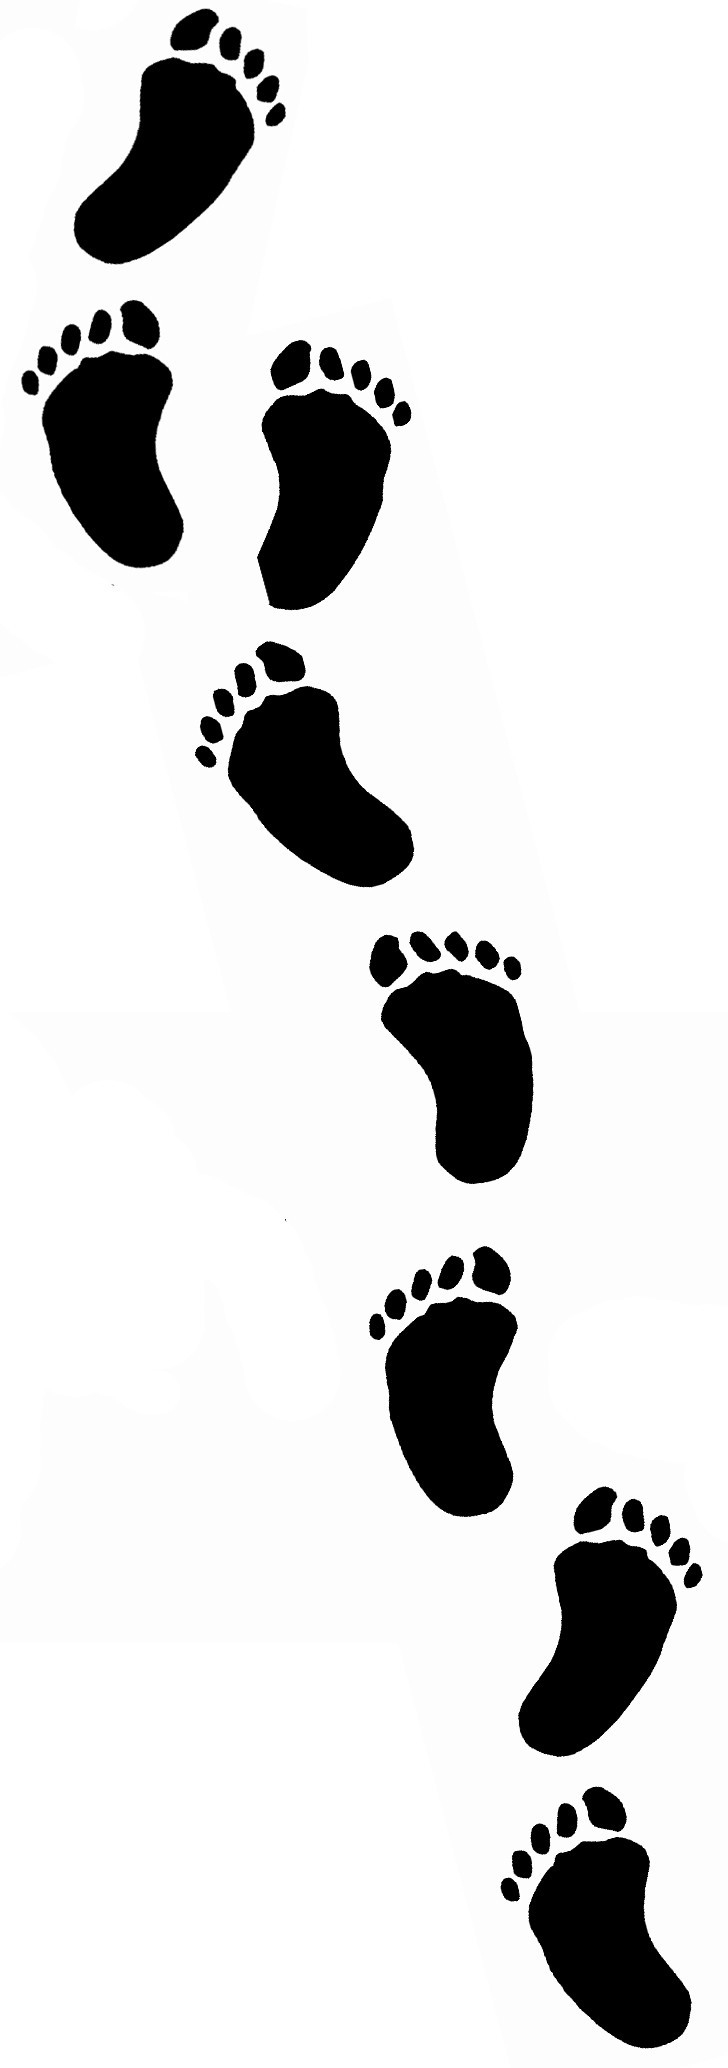 Footprints clipart black and white